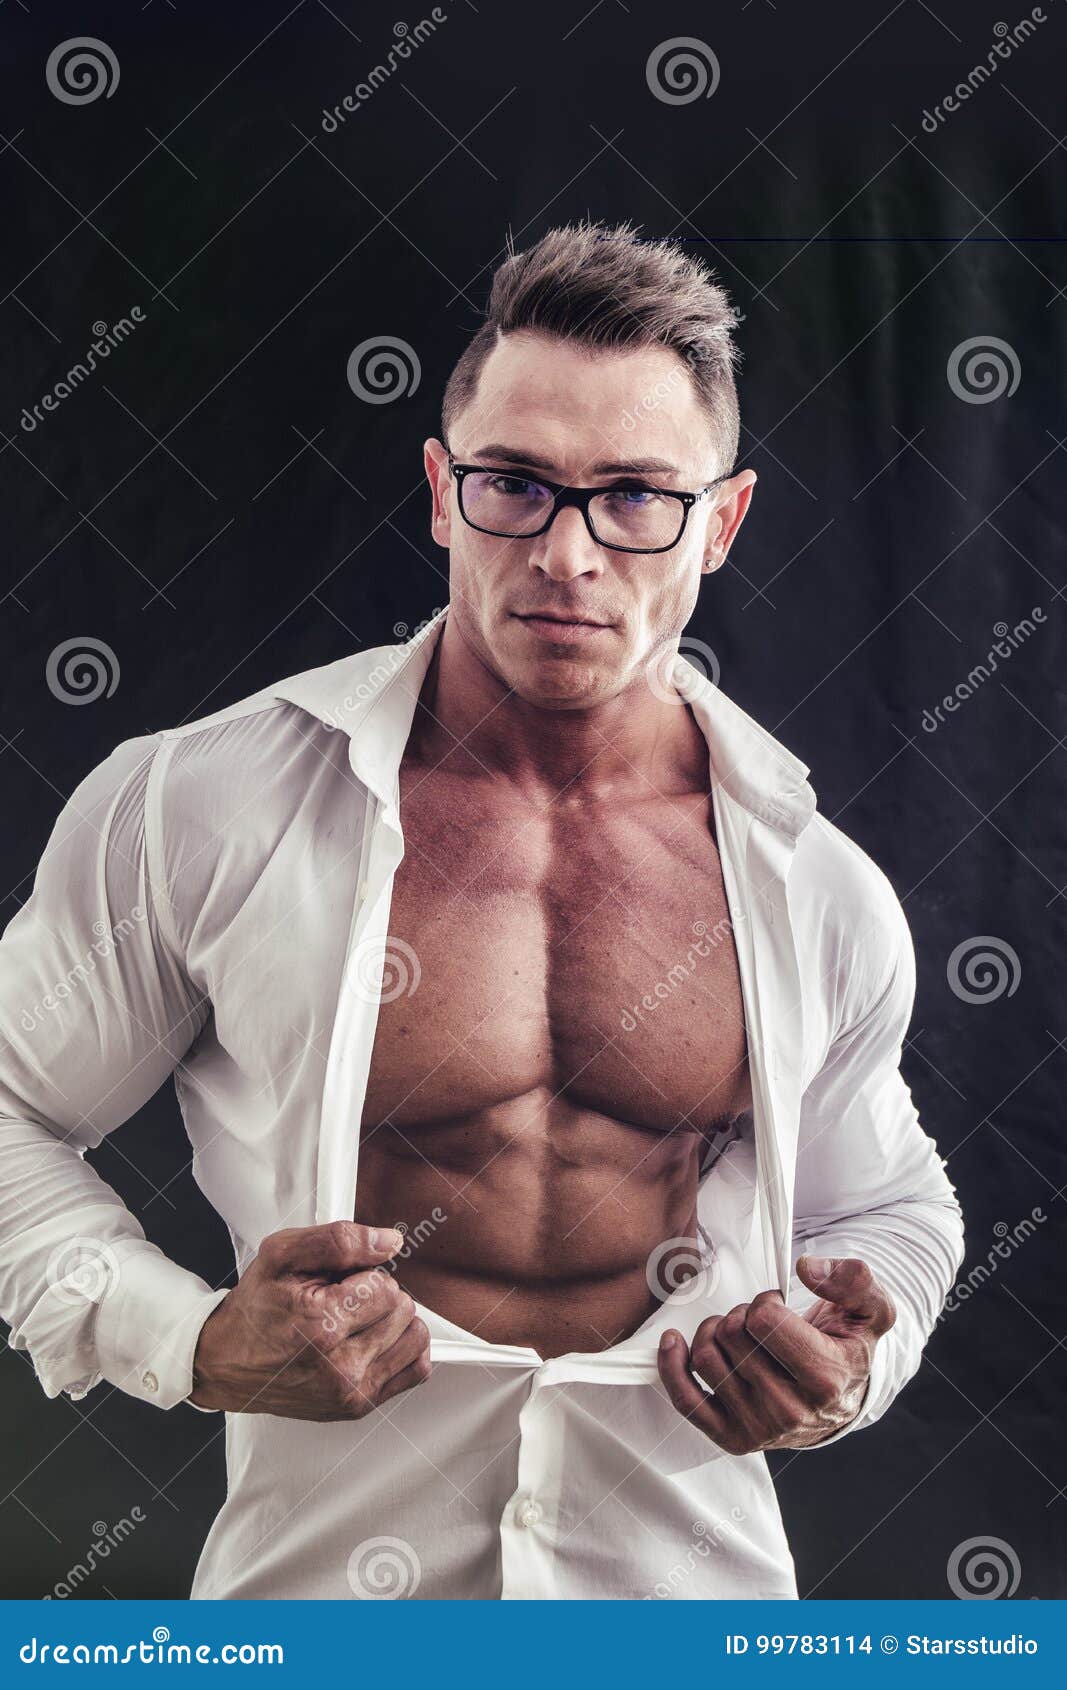 dorky man with glasses and muscle chest under shirt